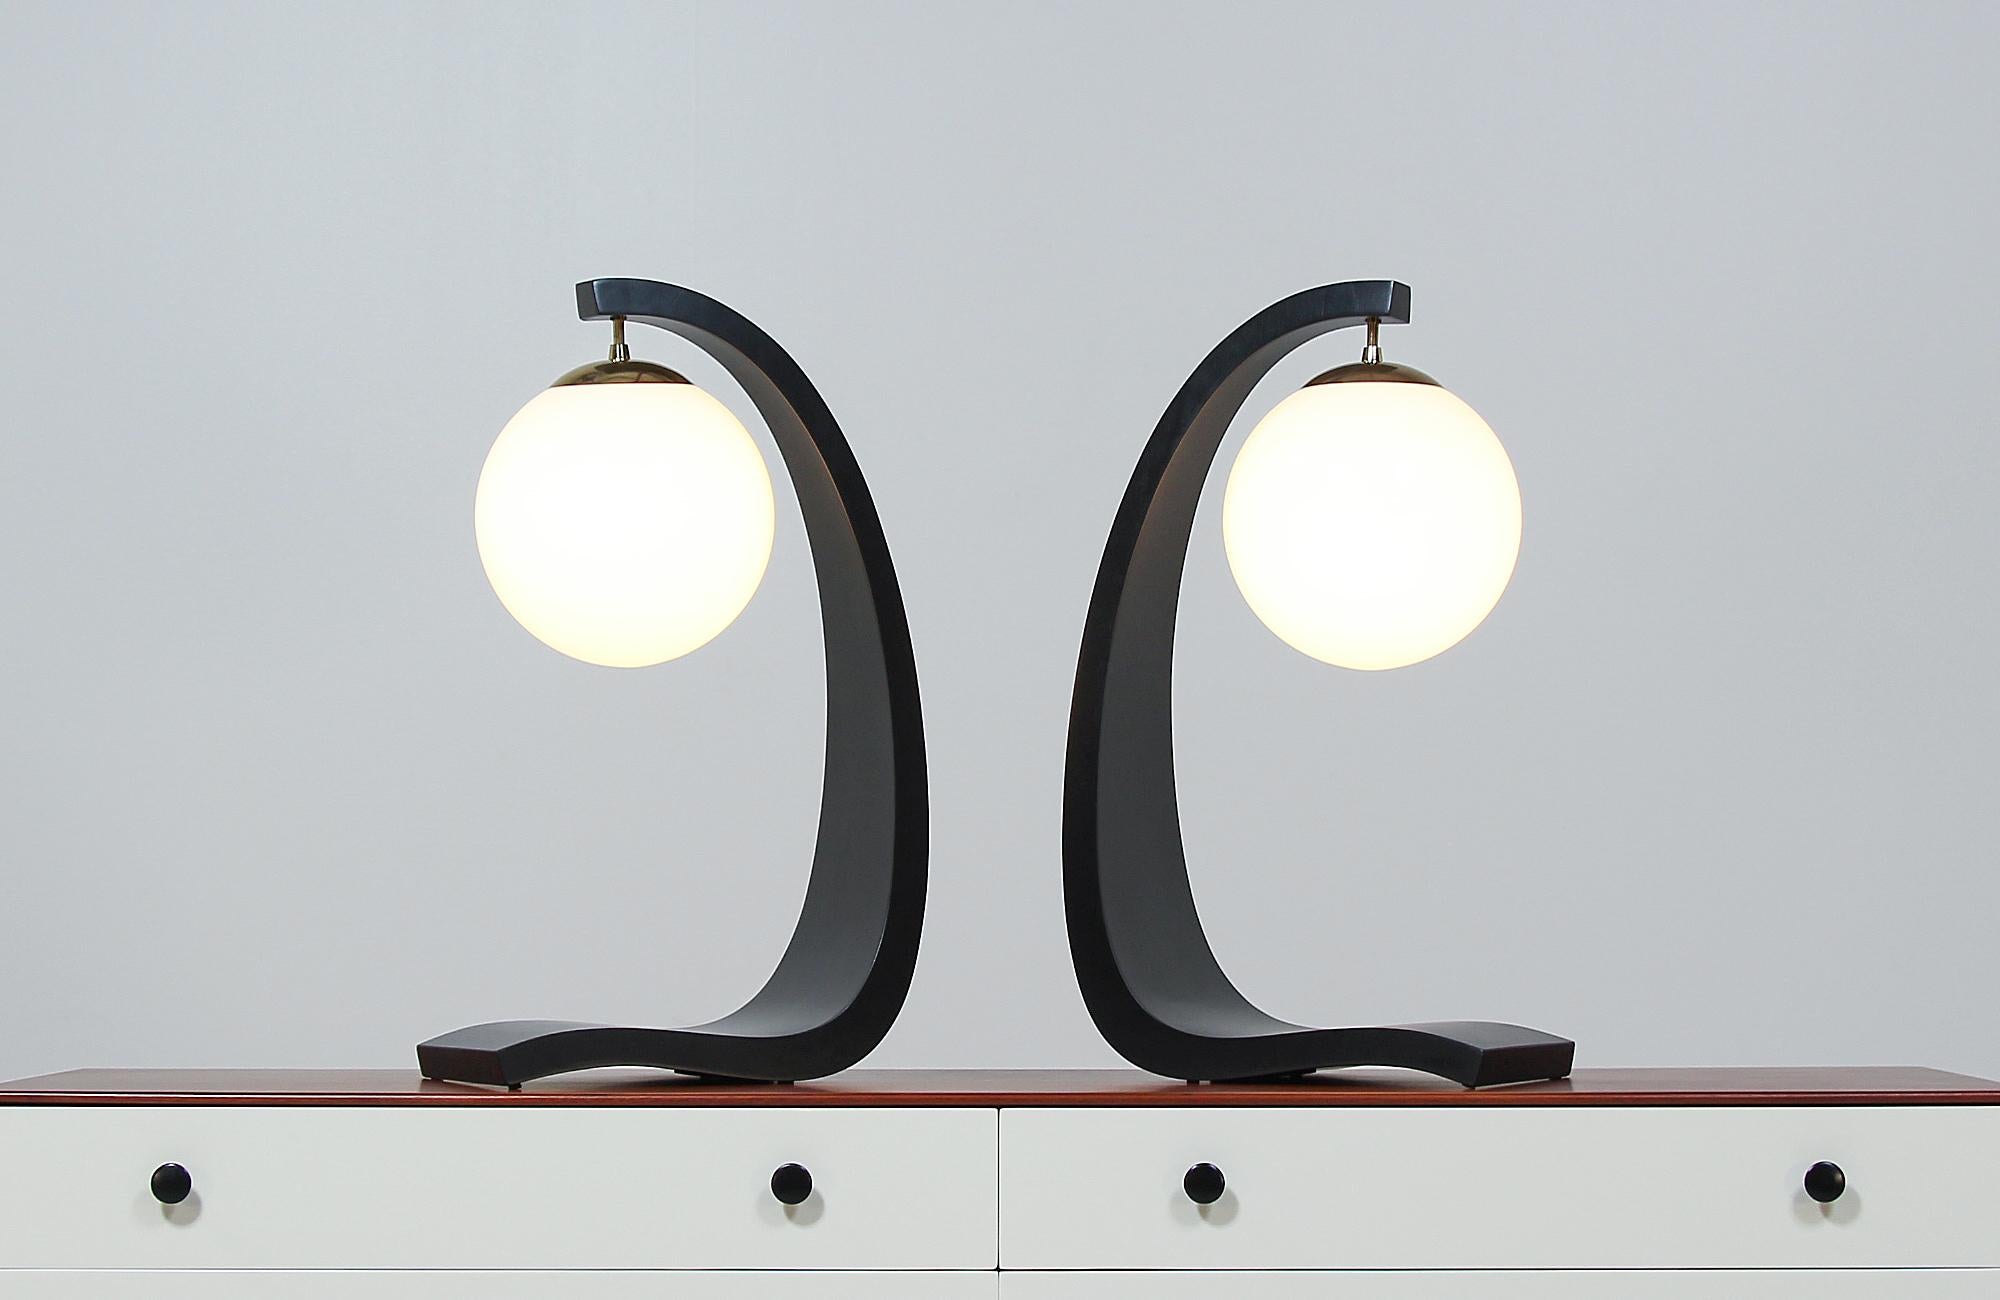 Beautiful pair of Mid-Century Modern table lamps designed by architect and designer Jack Haywood for Modeline of California in the United States circa 1960s. This dazzling lighting design features smooth curves that create a tall sculptural body